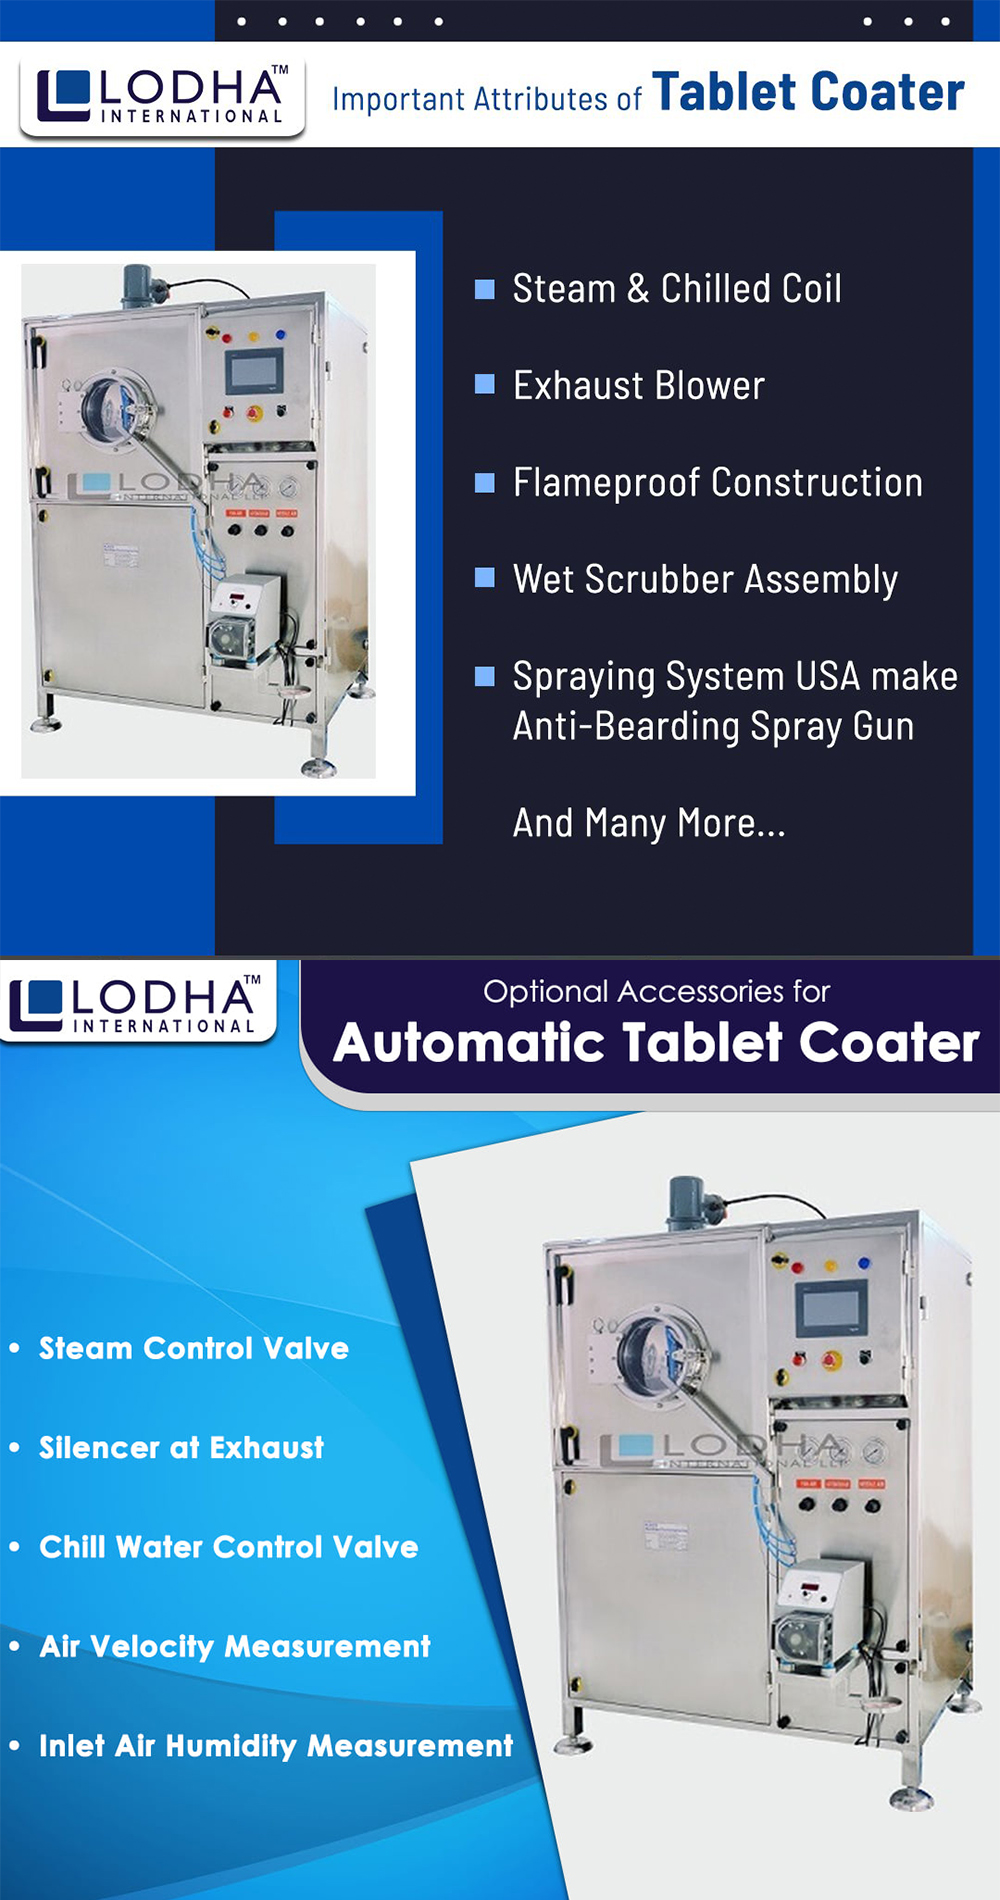 Automatic Tablet Coater Attributes and Accessories